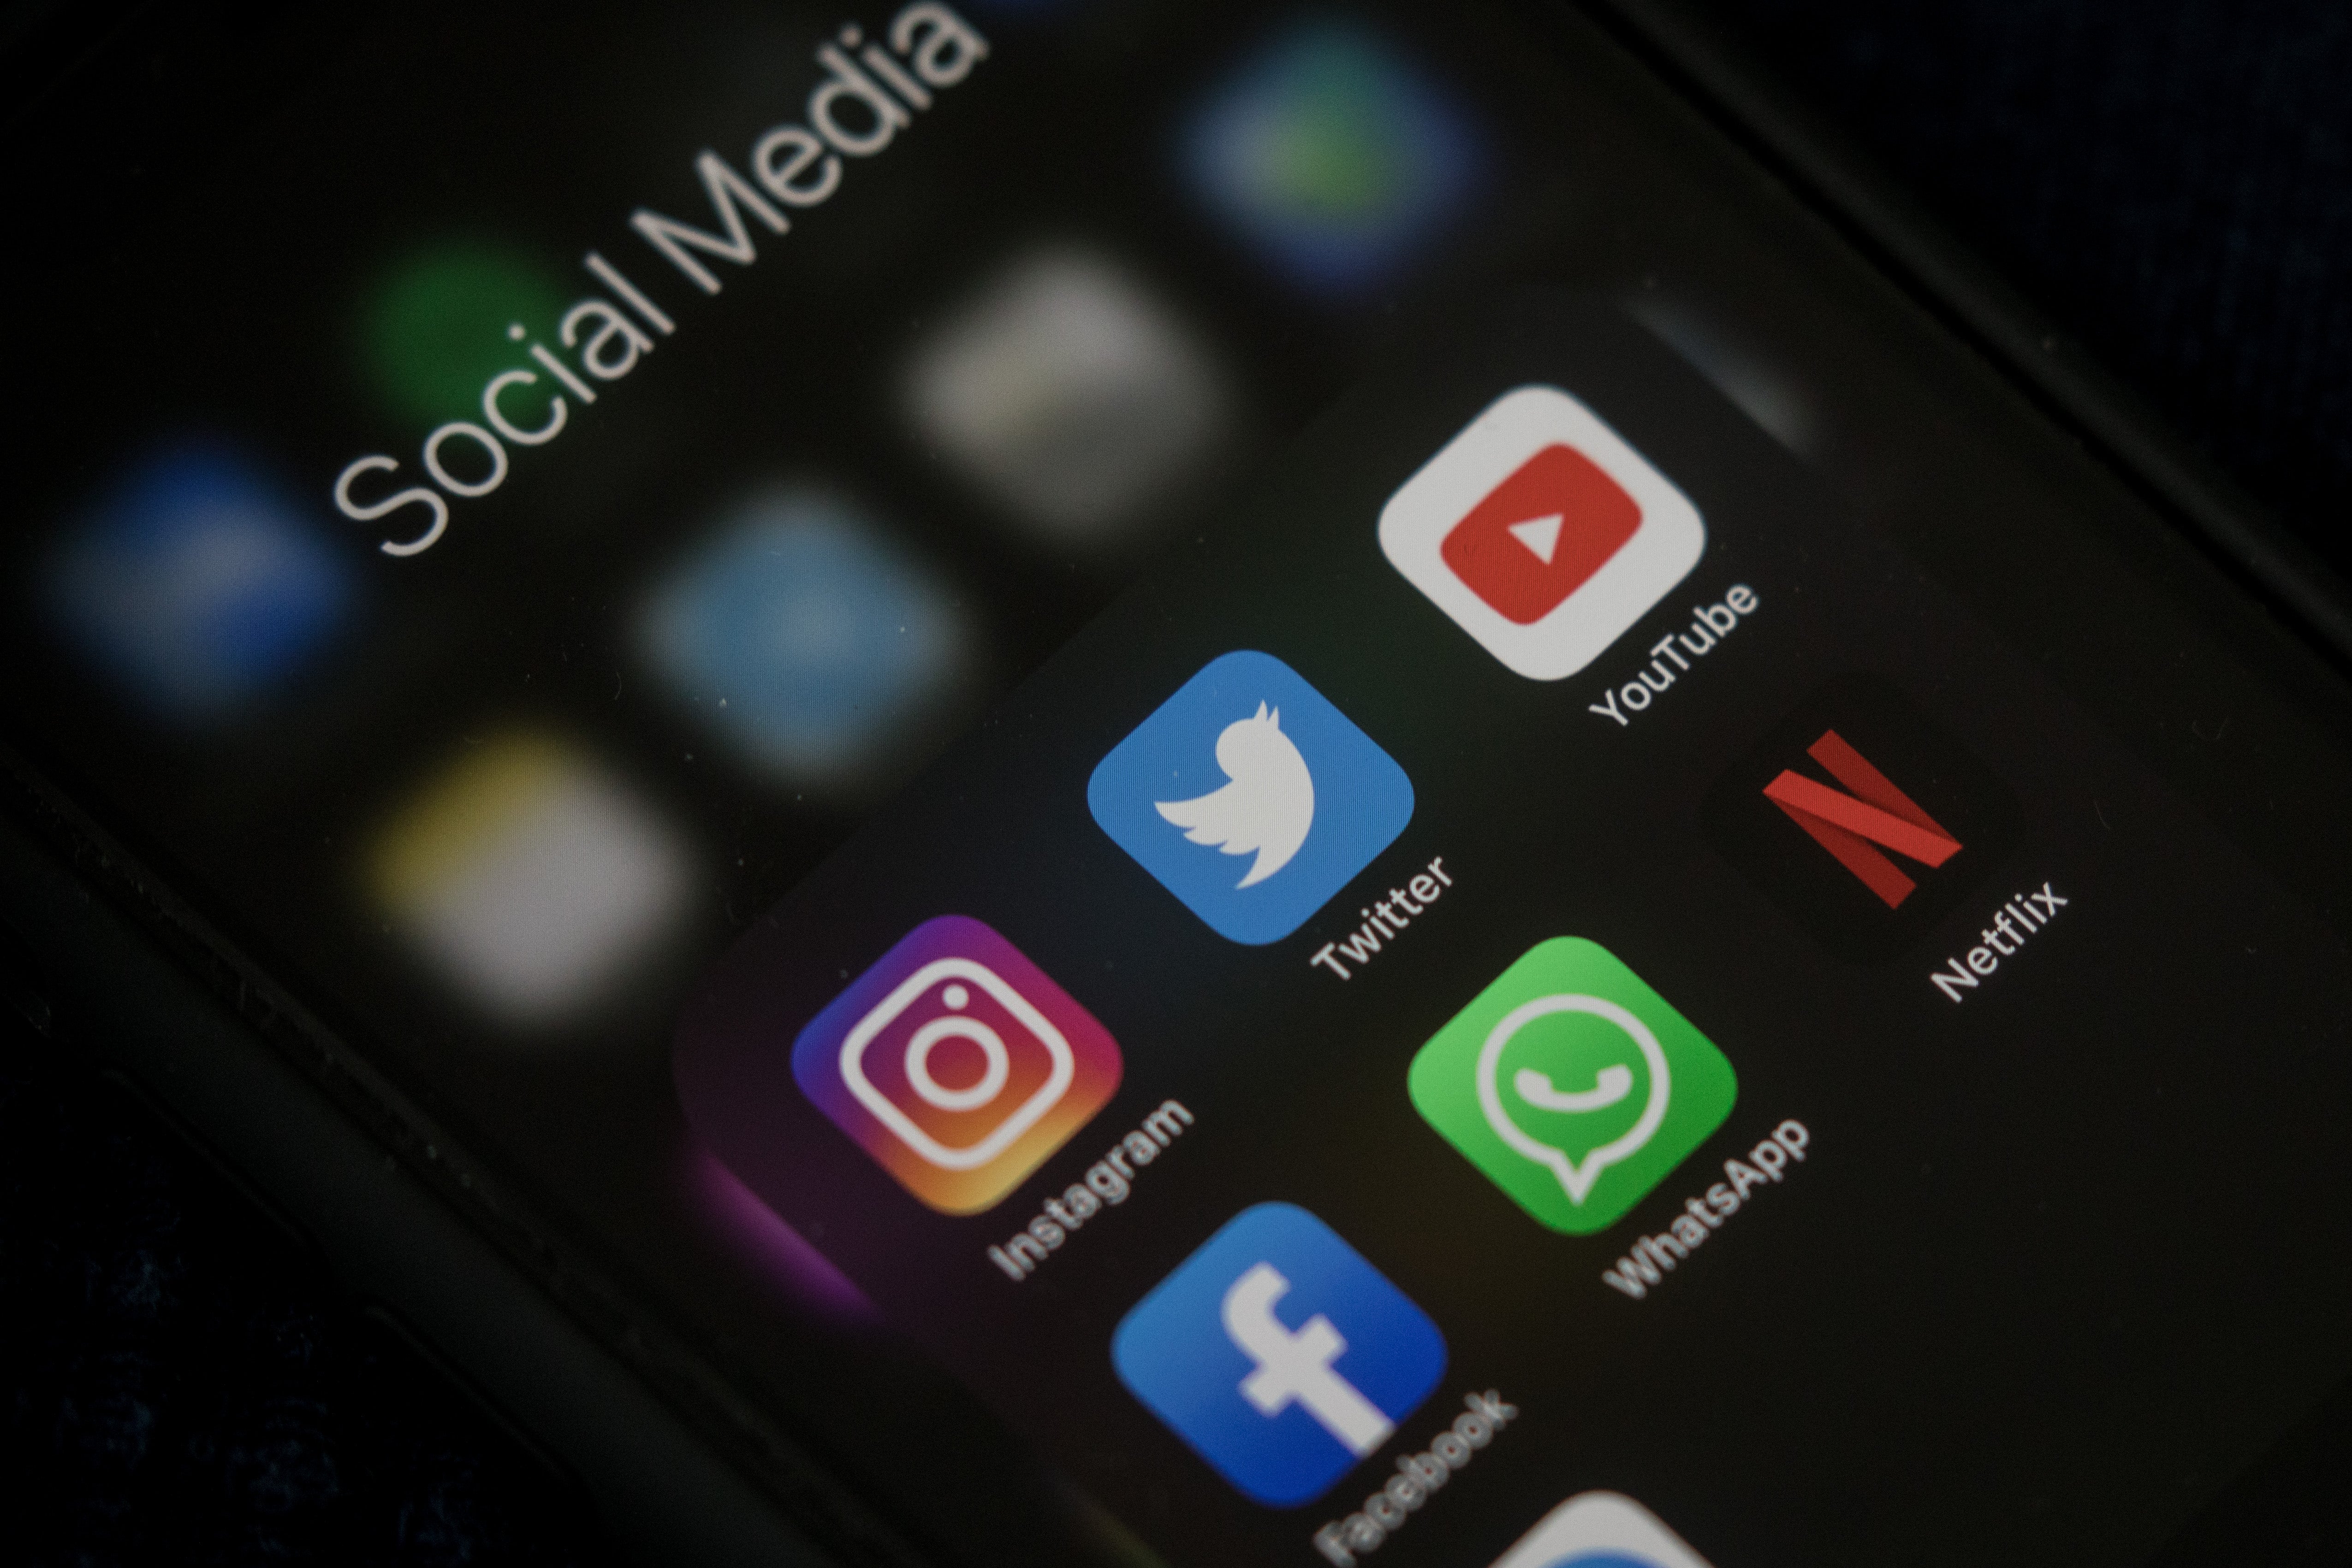 Sixty per cent of UK businesses still don’t use social media, according to a poll